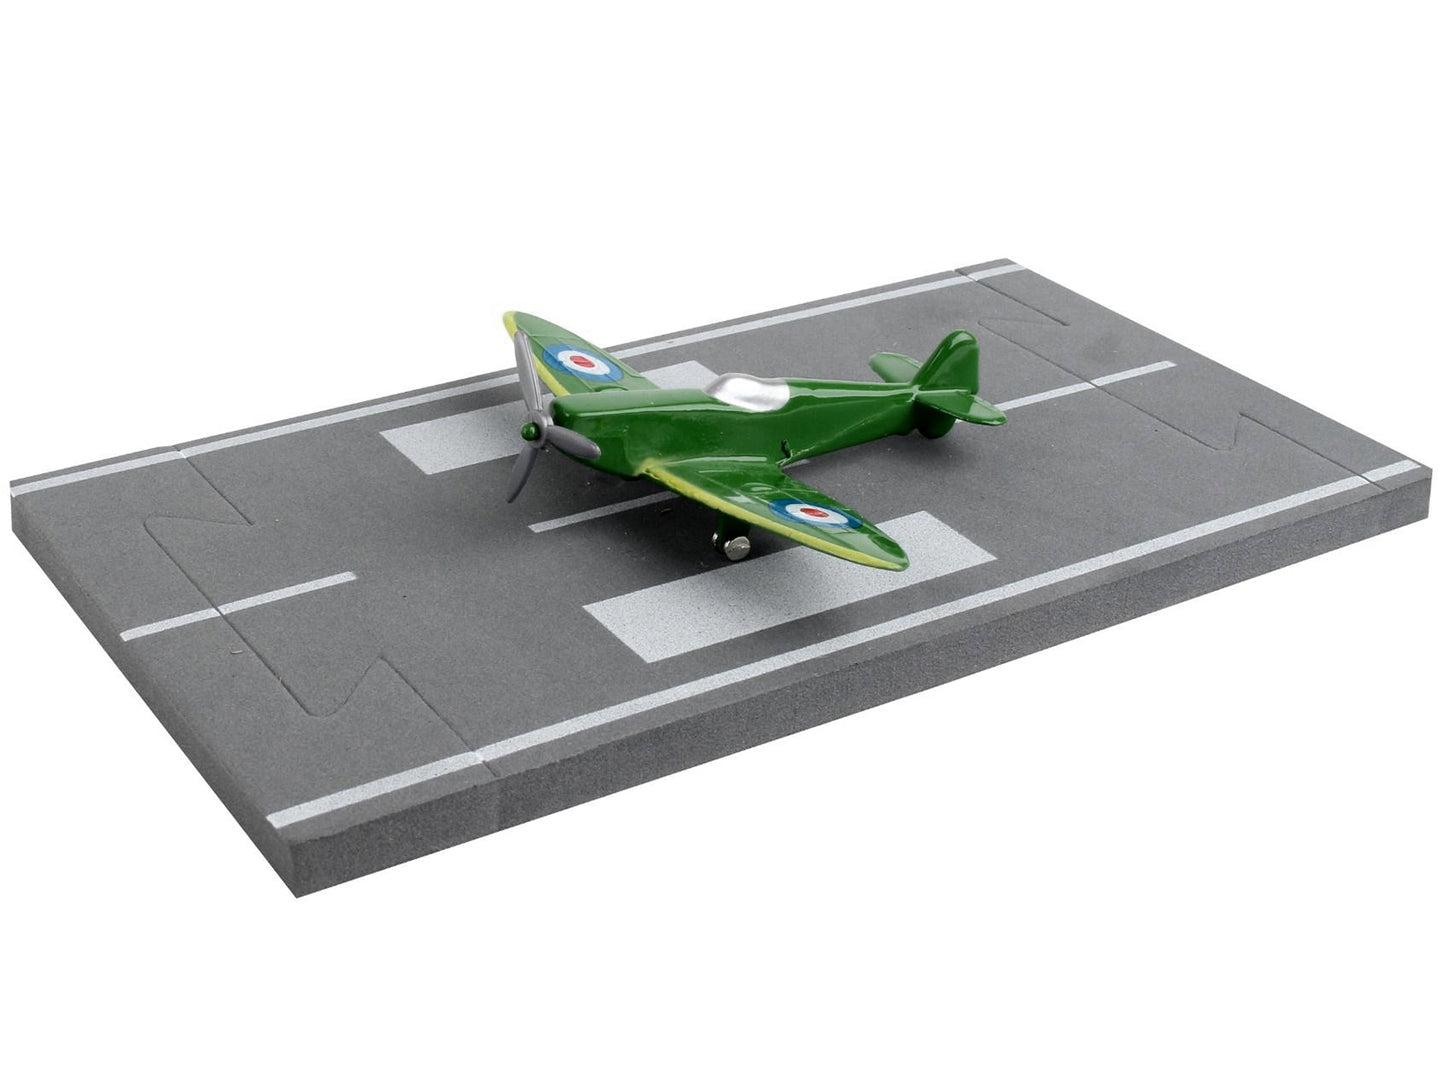 Supermarine Spitfire Fighter Aircraft Green "Royal Air Force" with Runway Section Diecast Model Airplane by Runway24